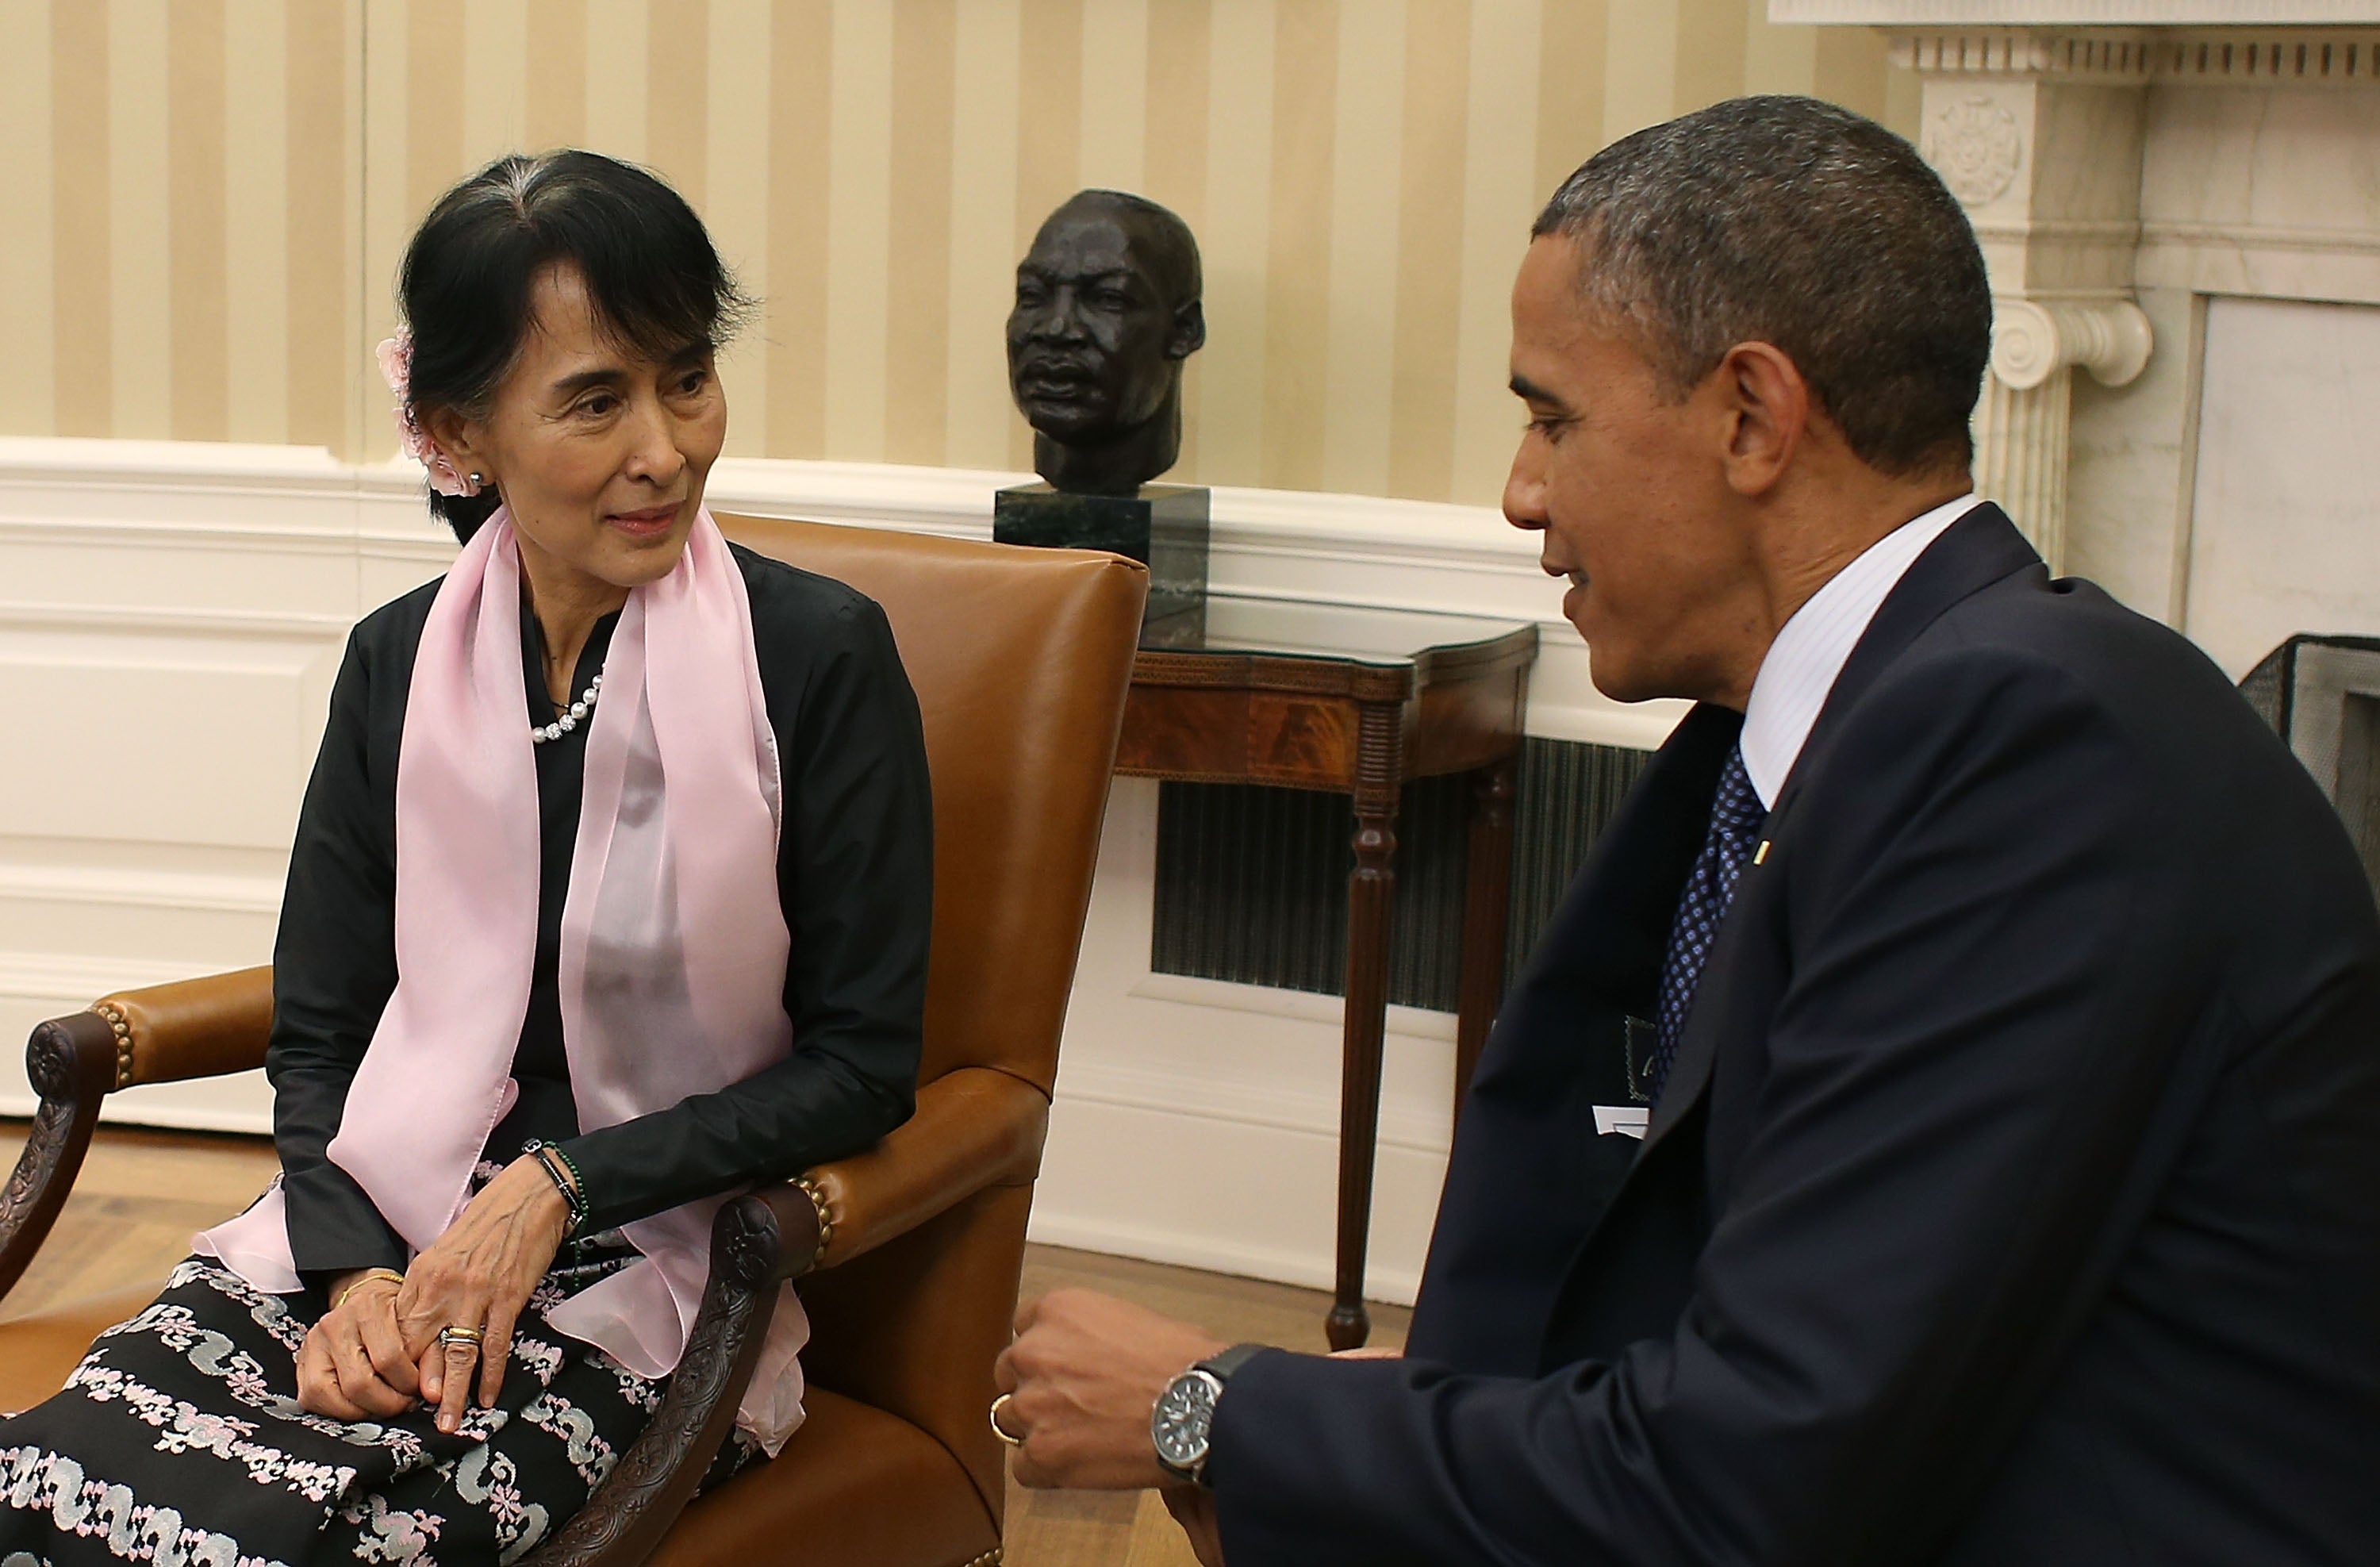 Aung San Suu Kyi met with President Obama in the White House in 2012